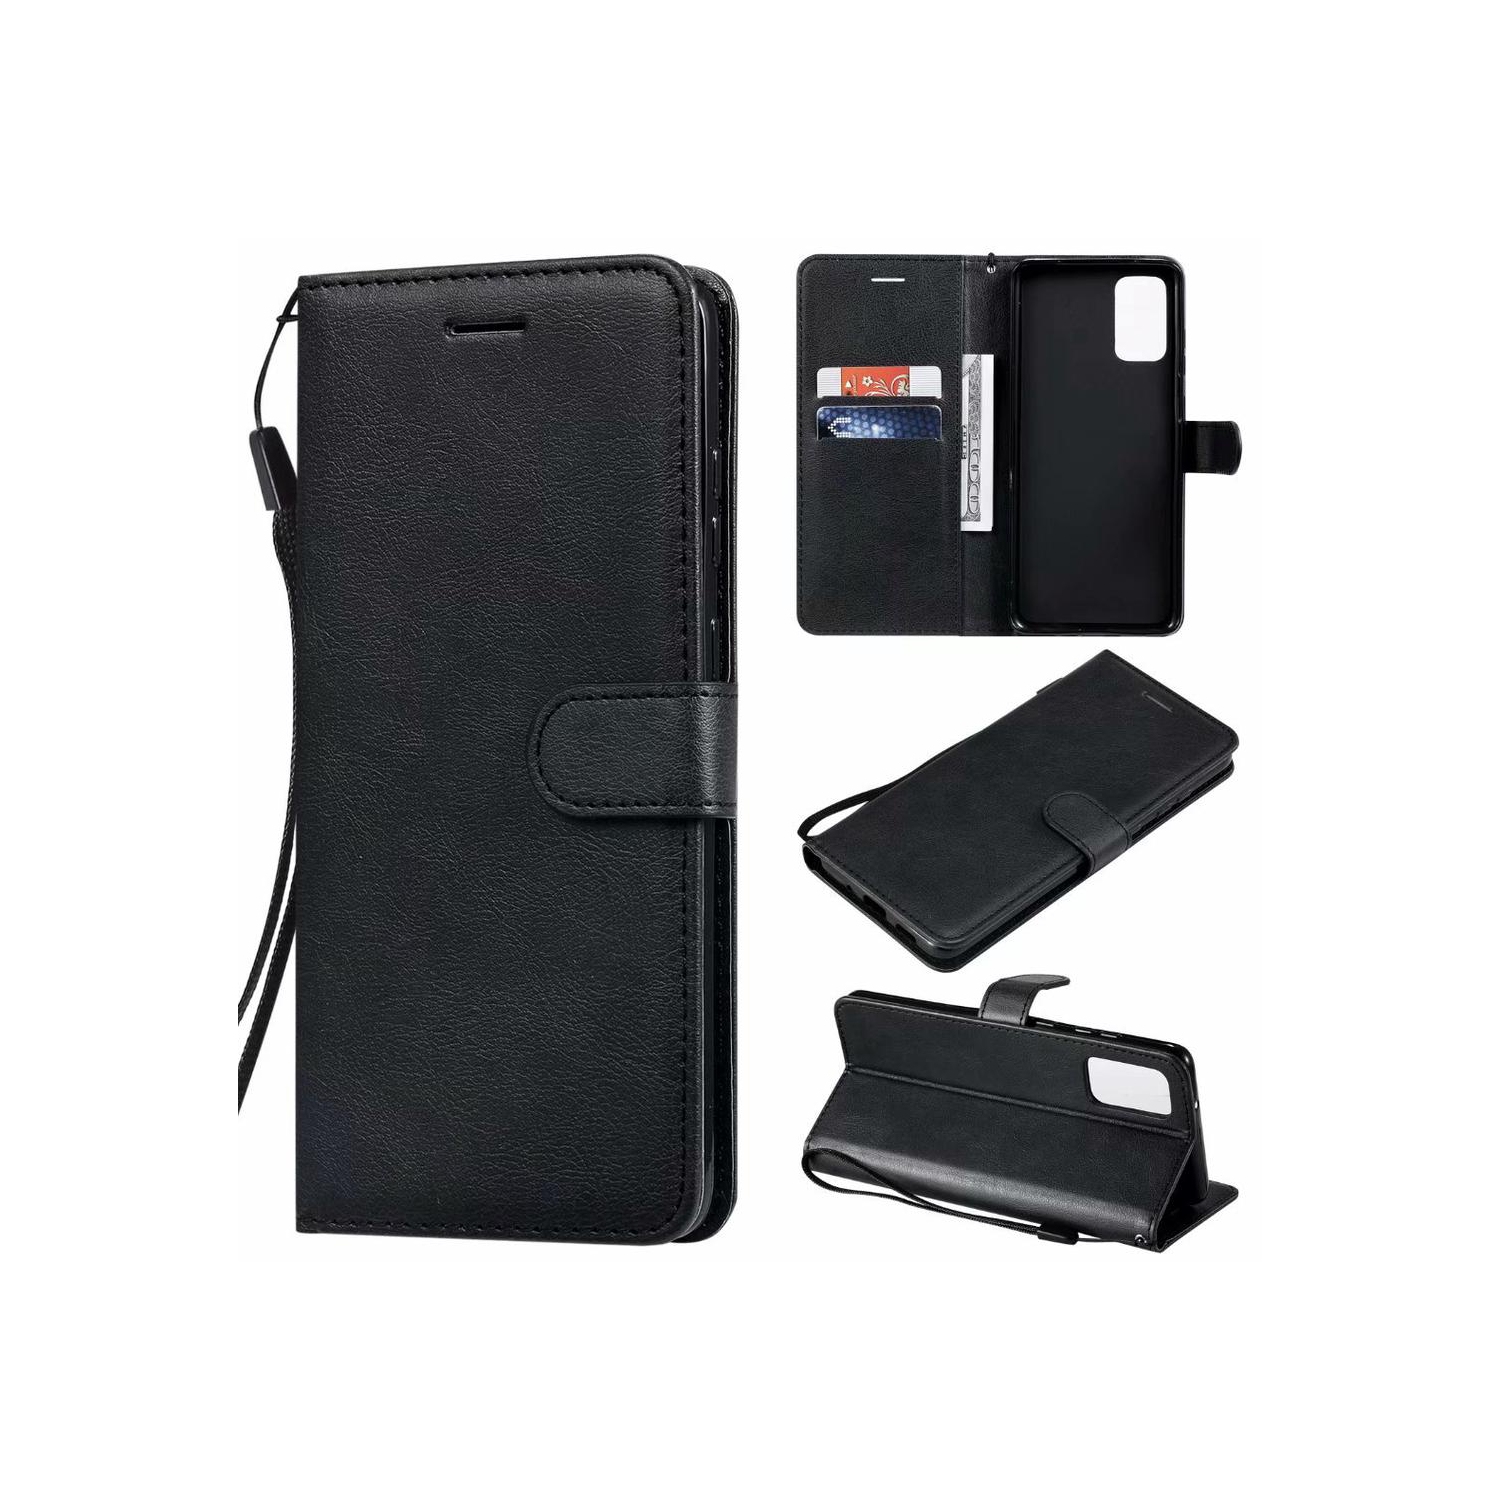 [CS] Samsung Galaxy A32 5G Case, Magnetic Leather Folio Wallet Flip Case Cover with Card Slot, Black